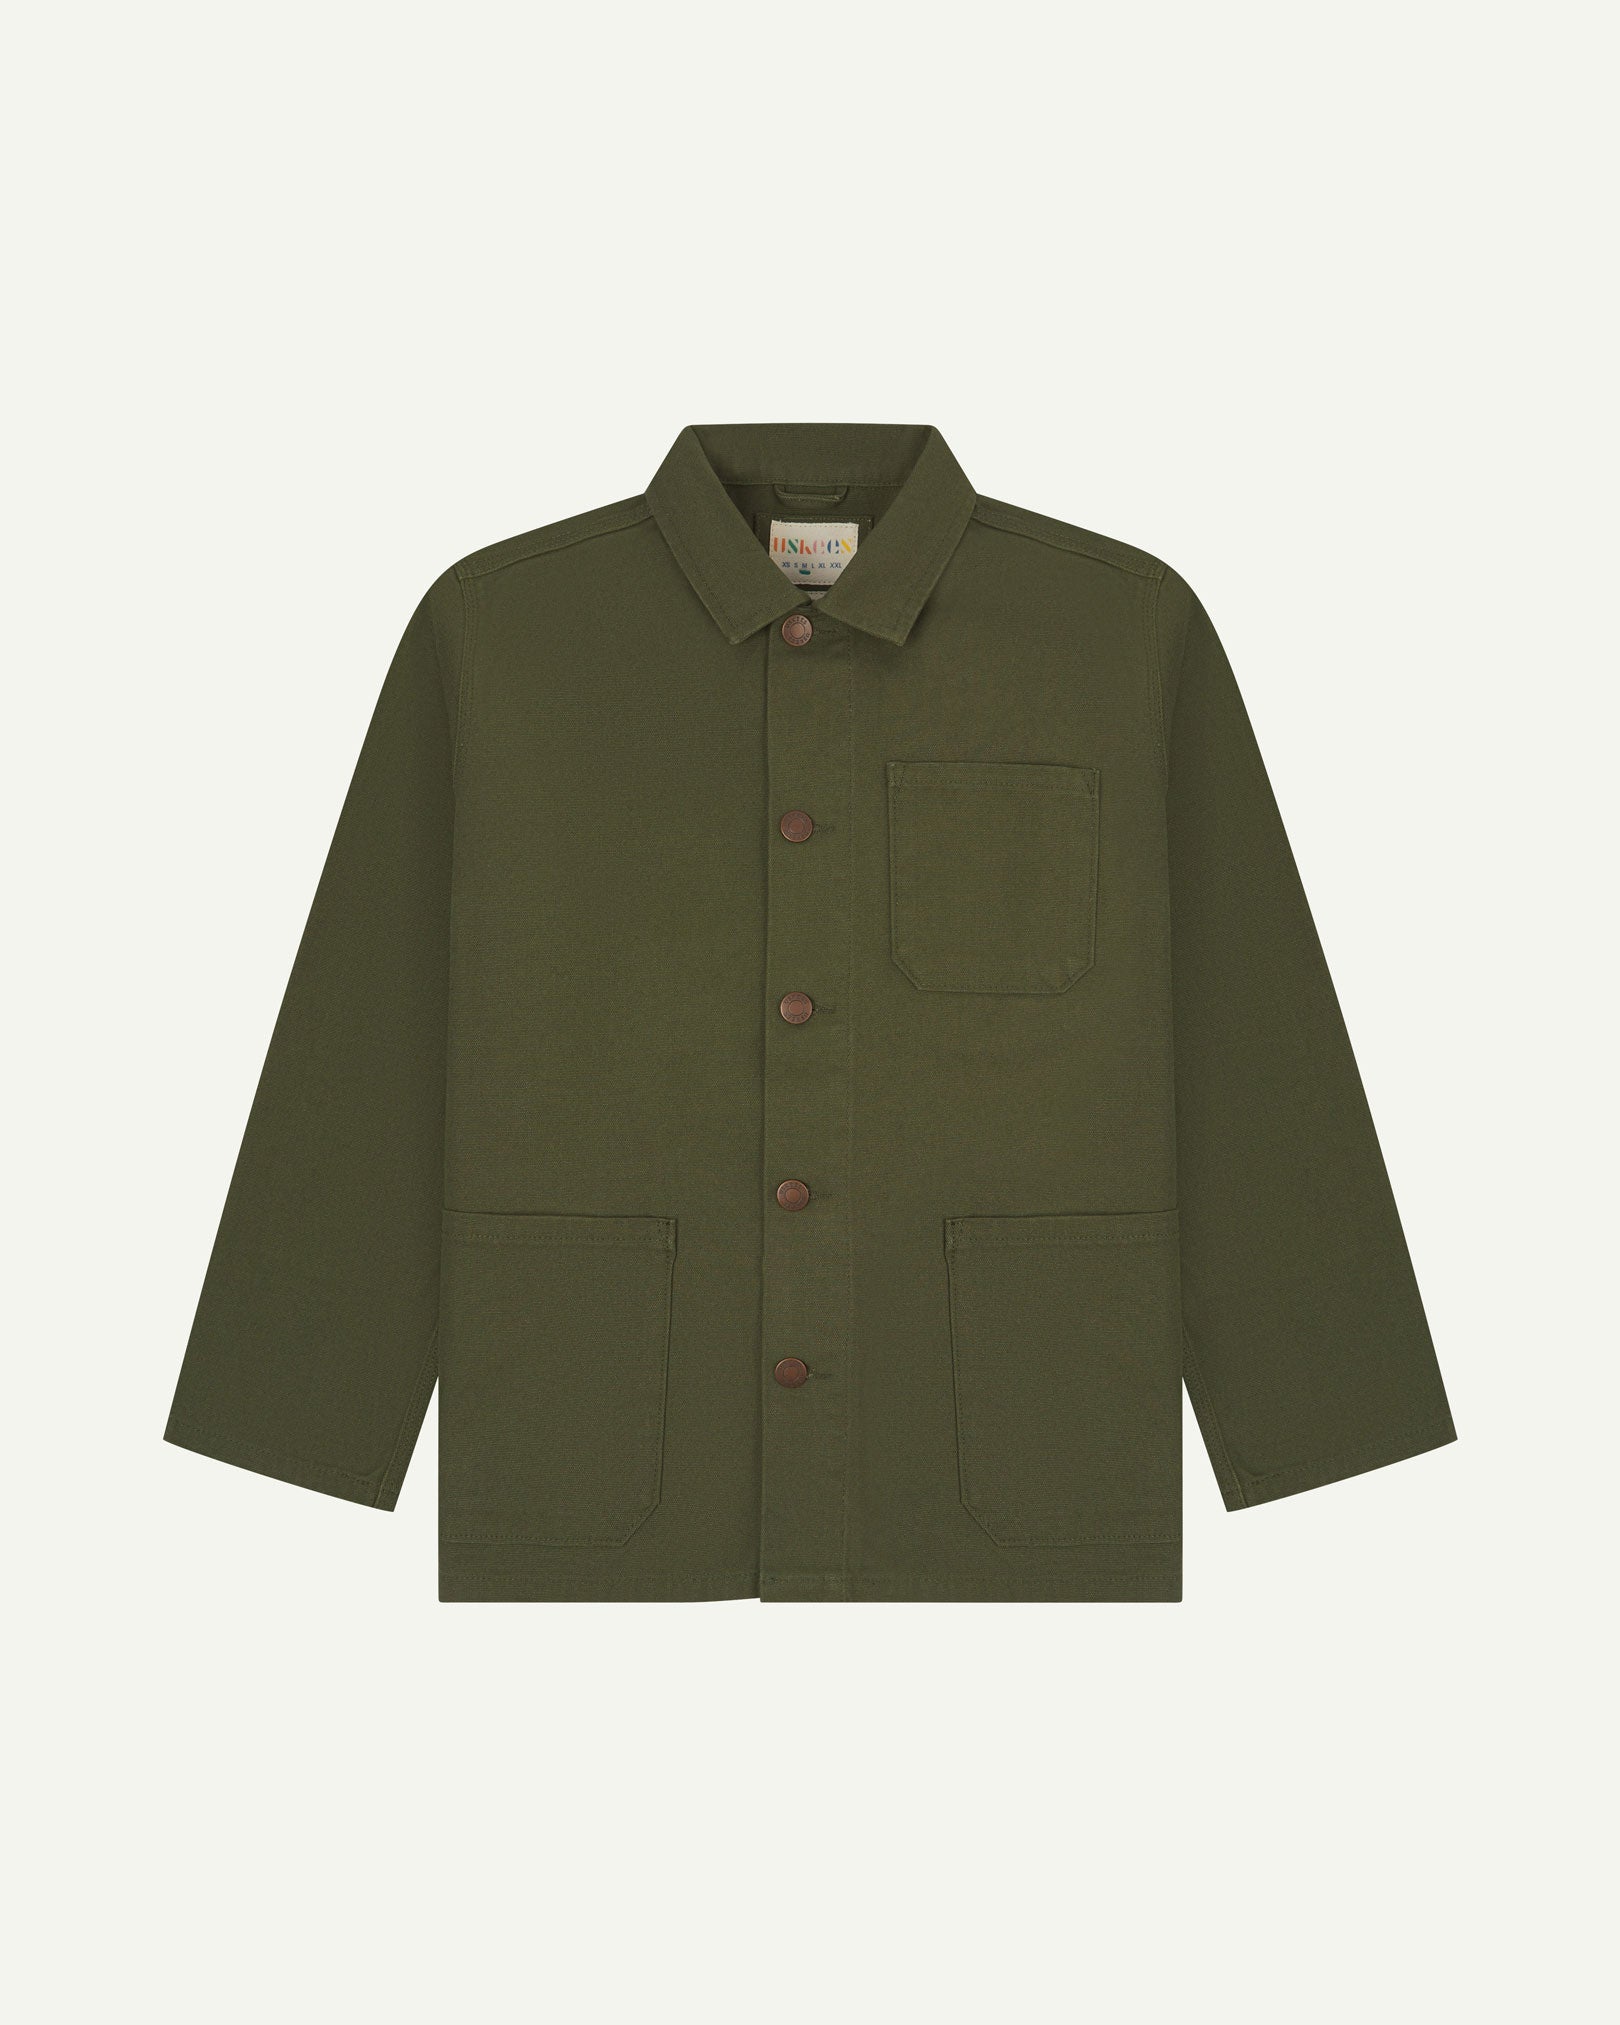 Front view of Uskees coriander-green canvas men's overshirt presented buttoned up showing the 3 front pockets.